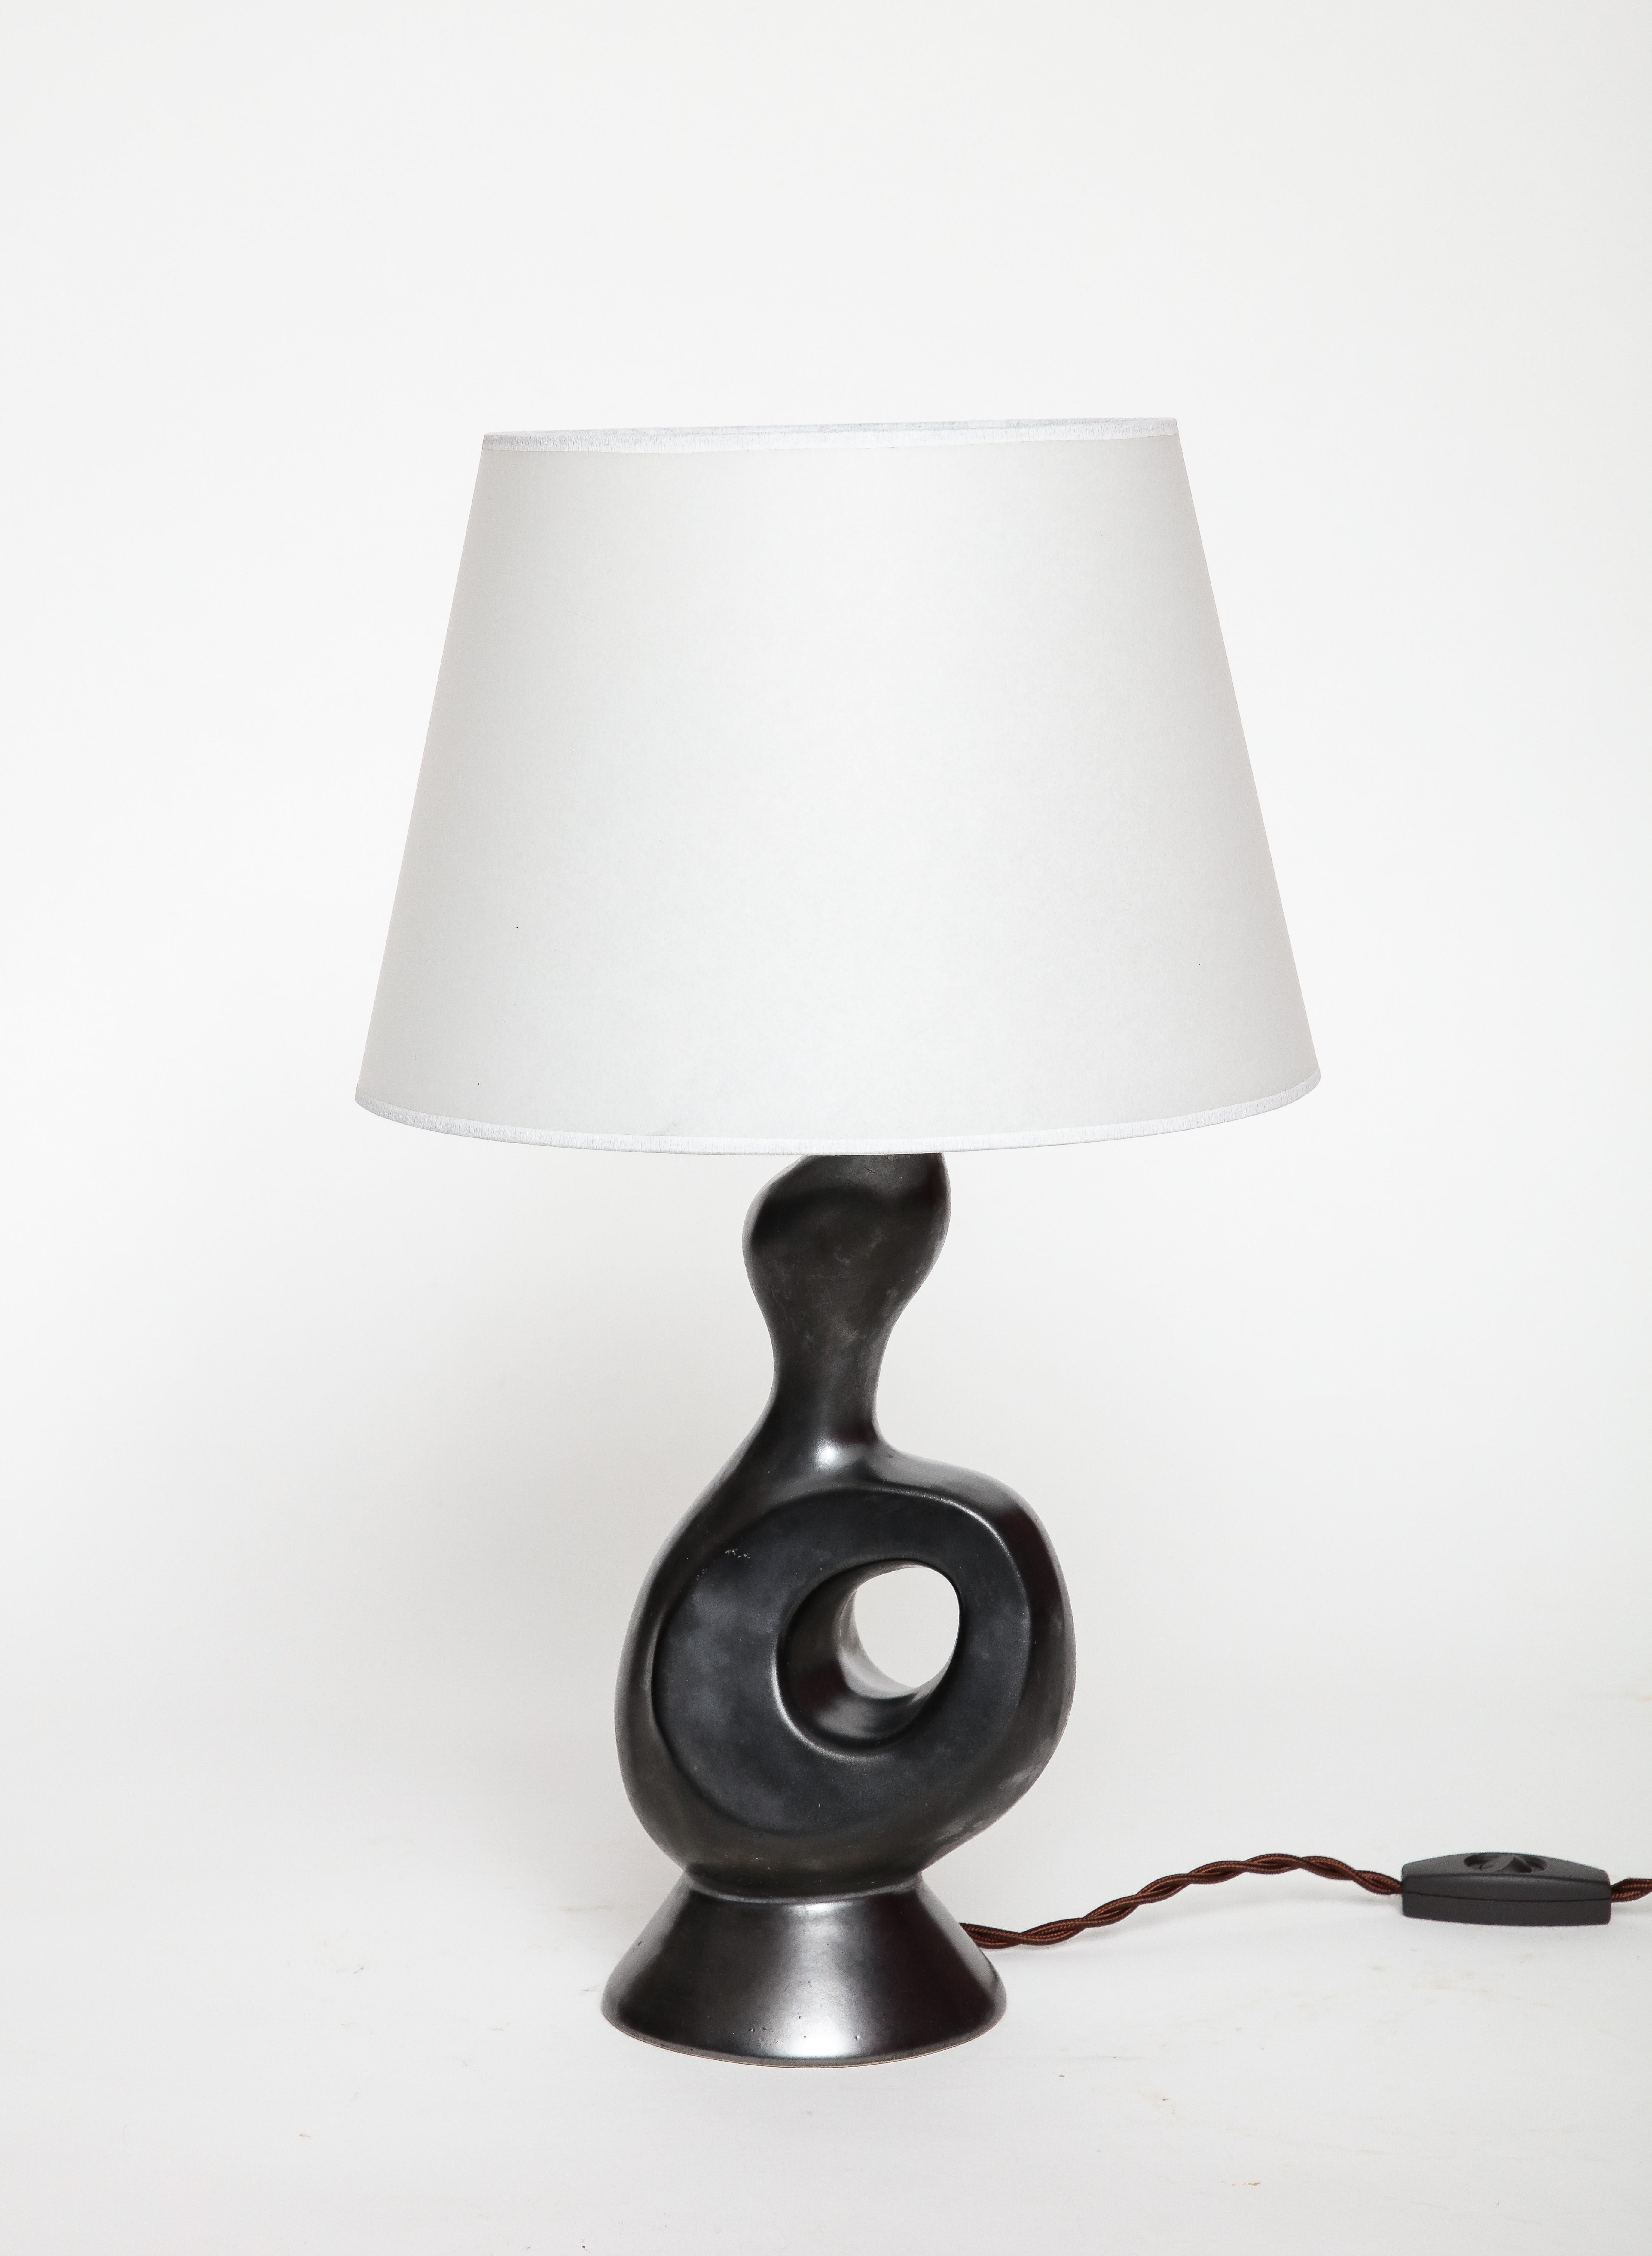 Mid-Century Modern Gil Angoloni Zoomorphic Ceramic Lamp, Parchment Shade. France, c. 1950, signed